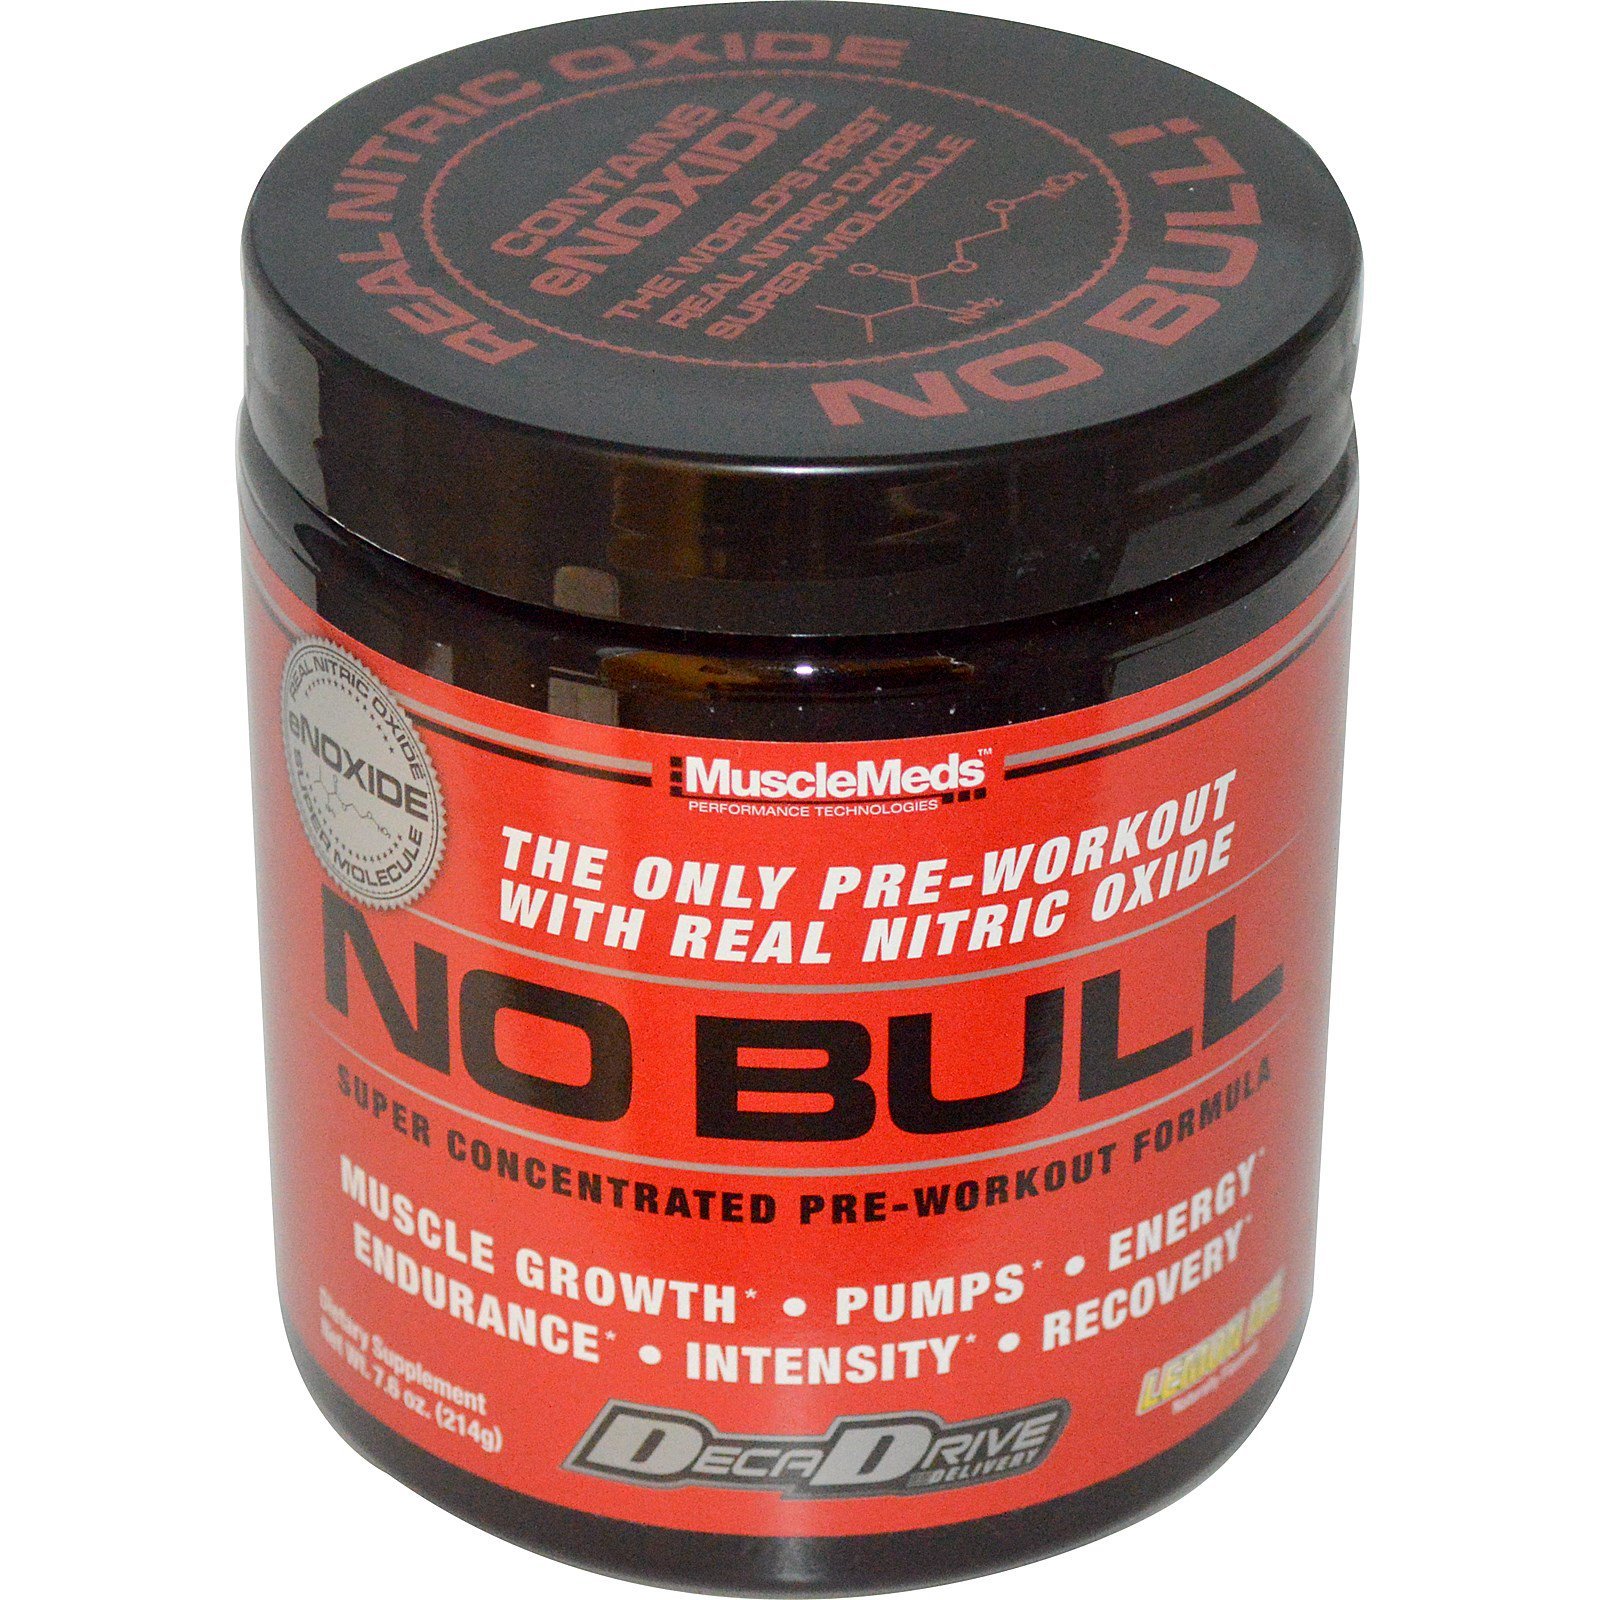 MuscleMeds, No Bull, Super Concentrated 